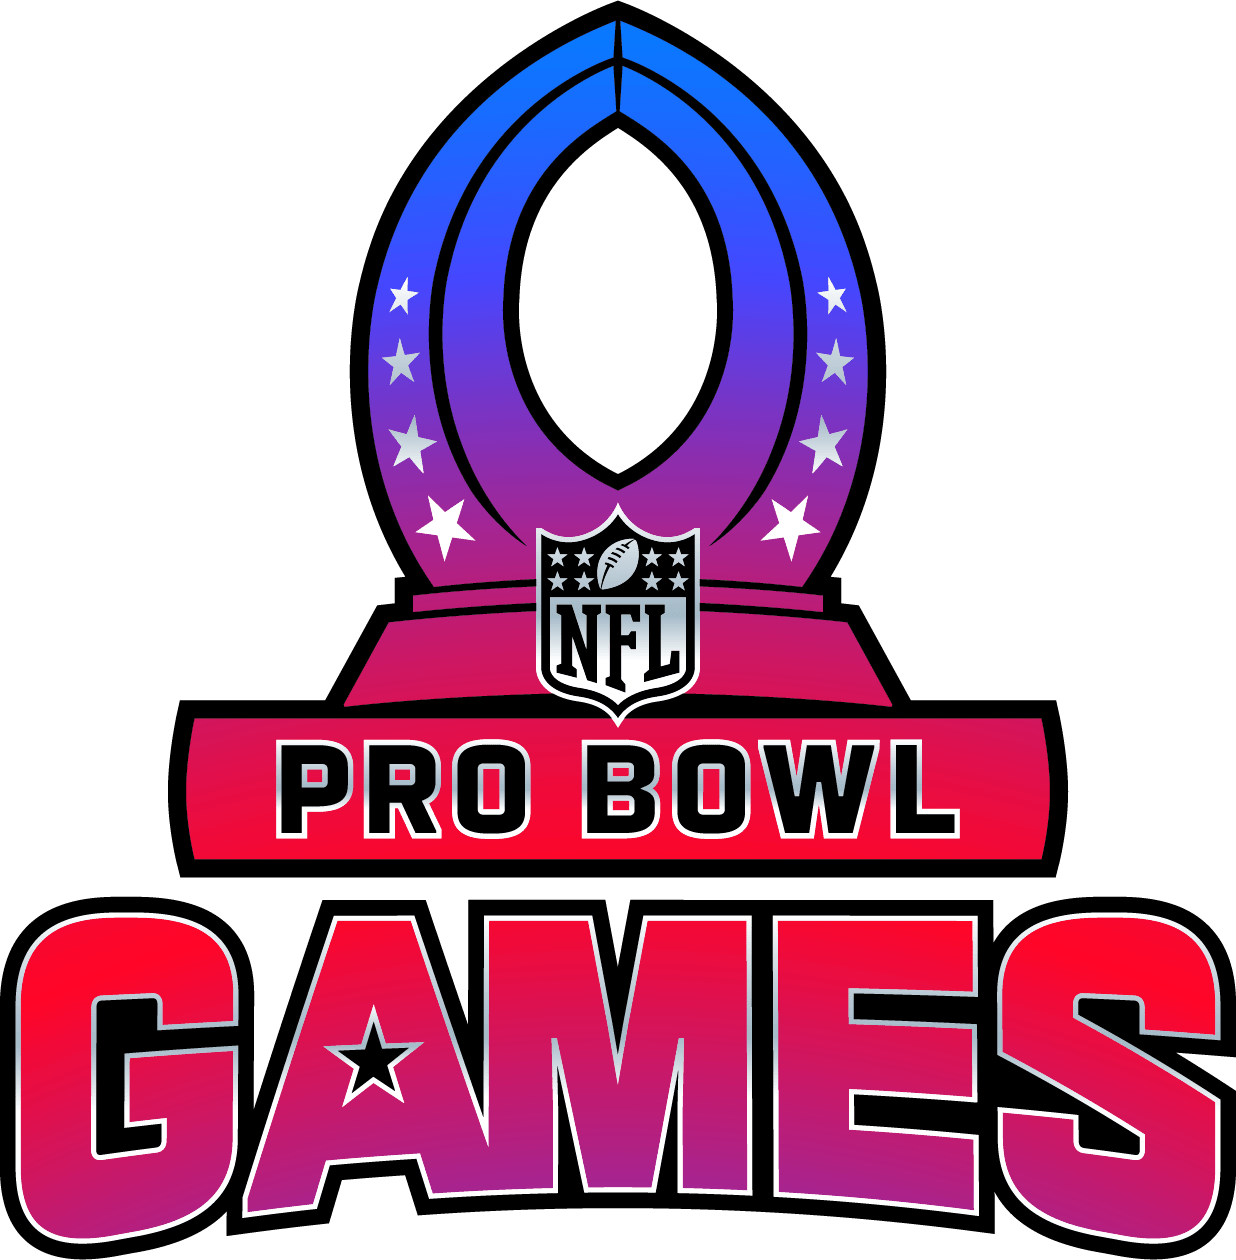 what day is the pro bowl